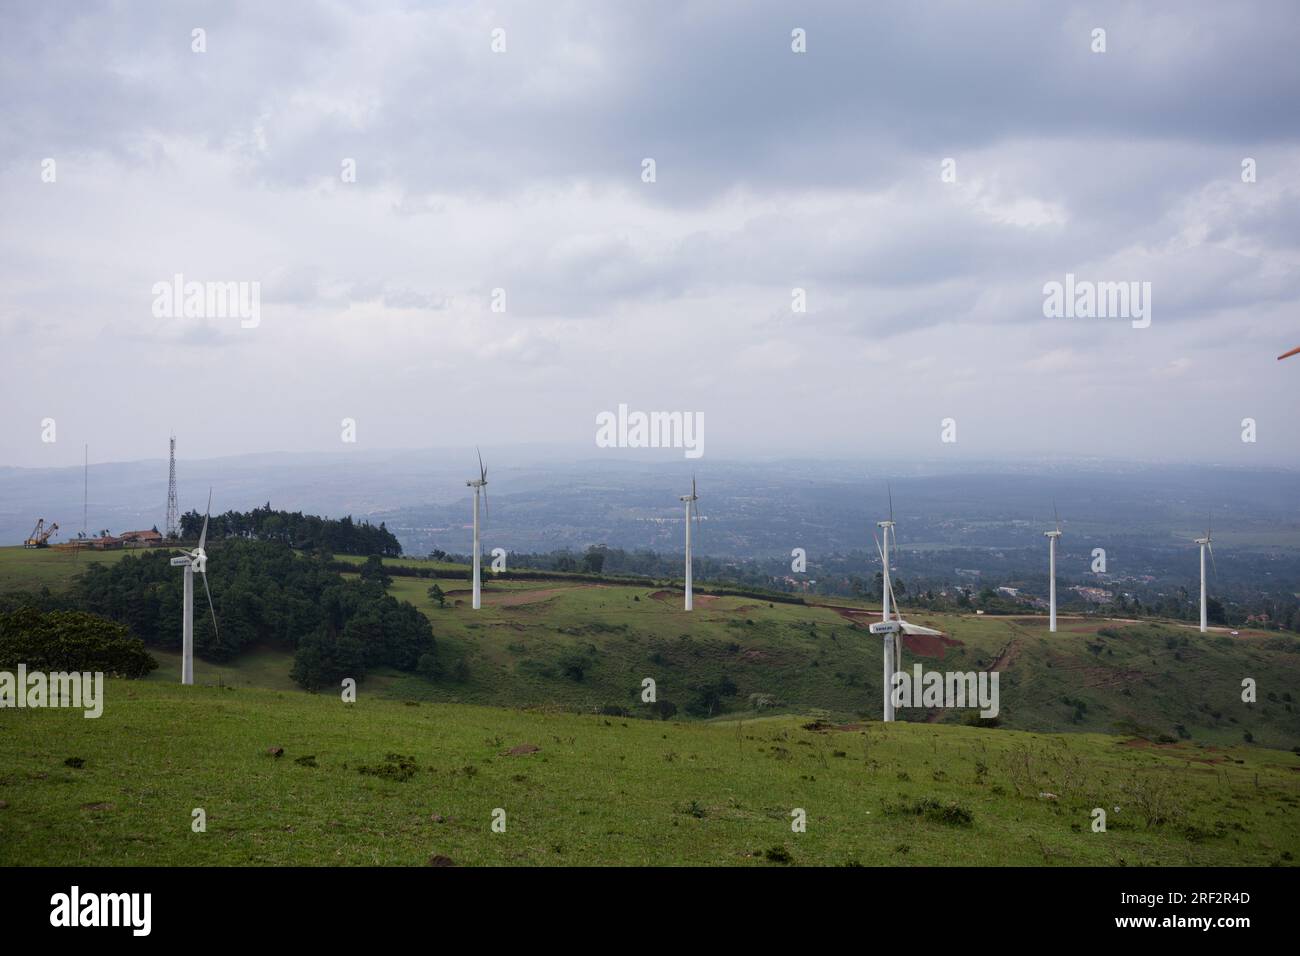 Wind power energy station at the Ngong Hills Forest Reserve Recreational Picnic Site Park Kajiado County Kenya Great Rift Valley Generation High Point Stock Photo